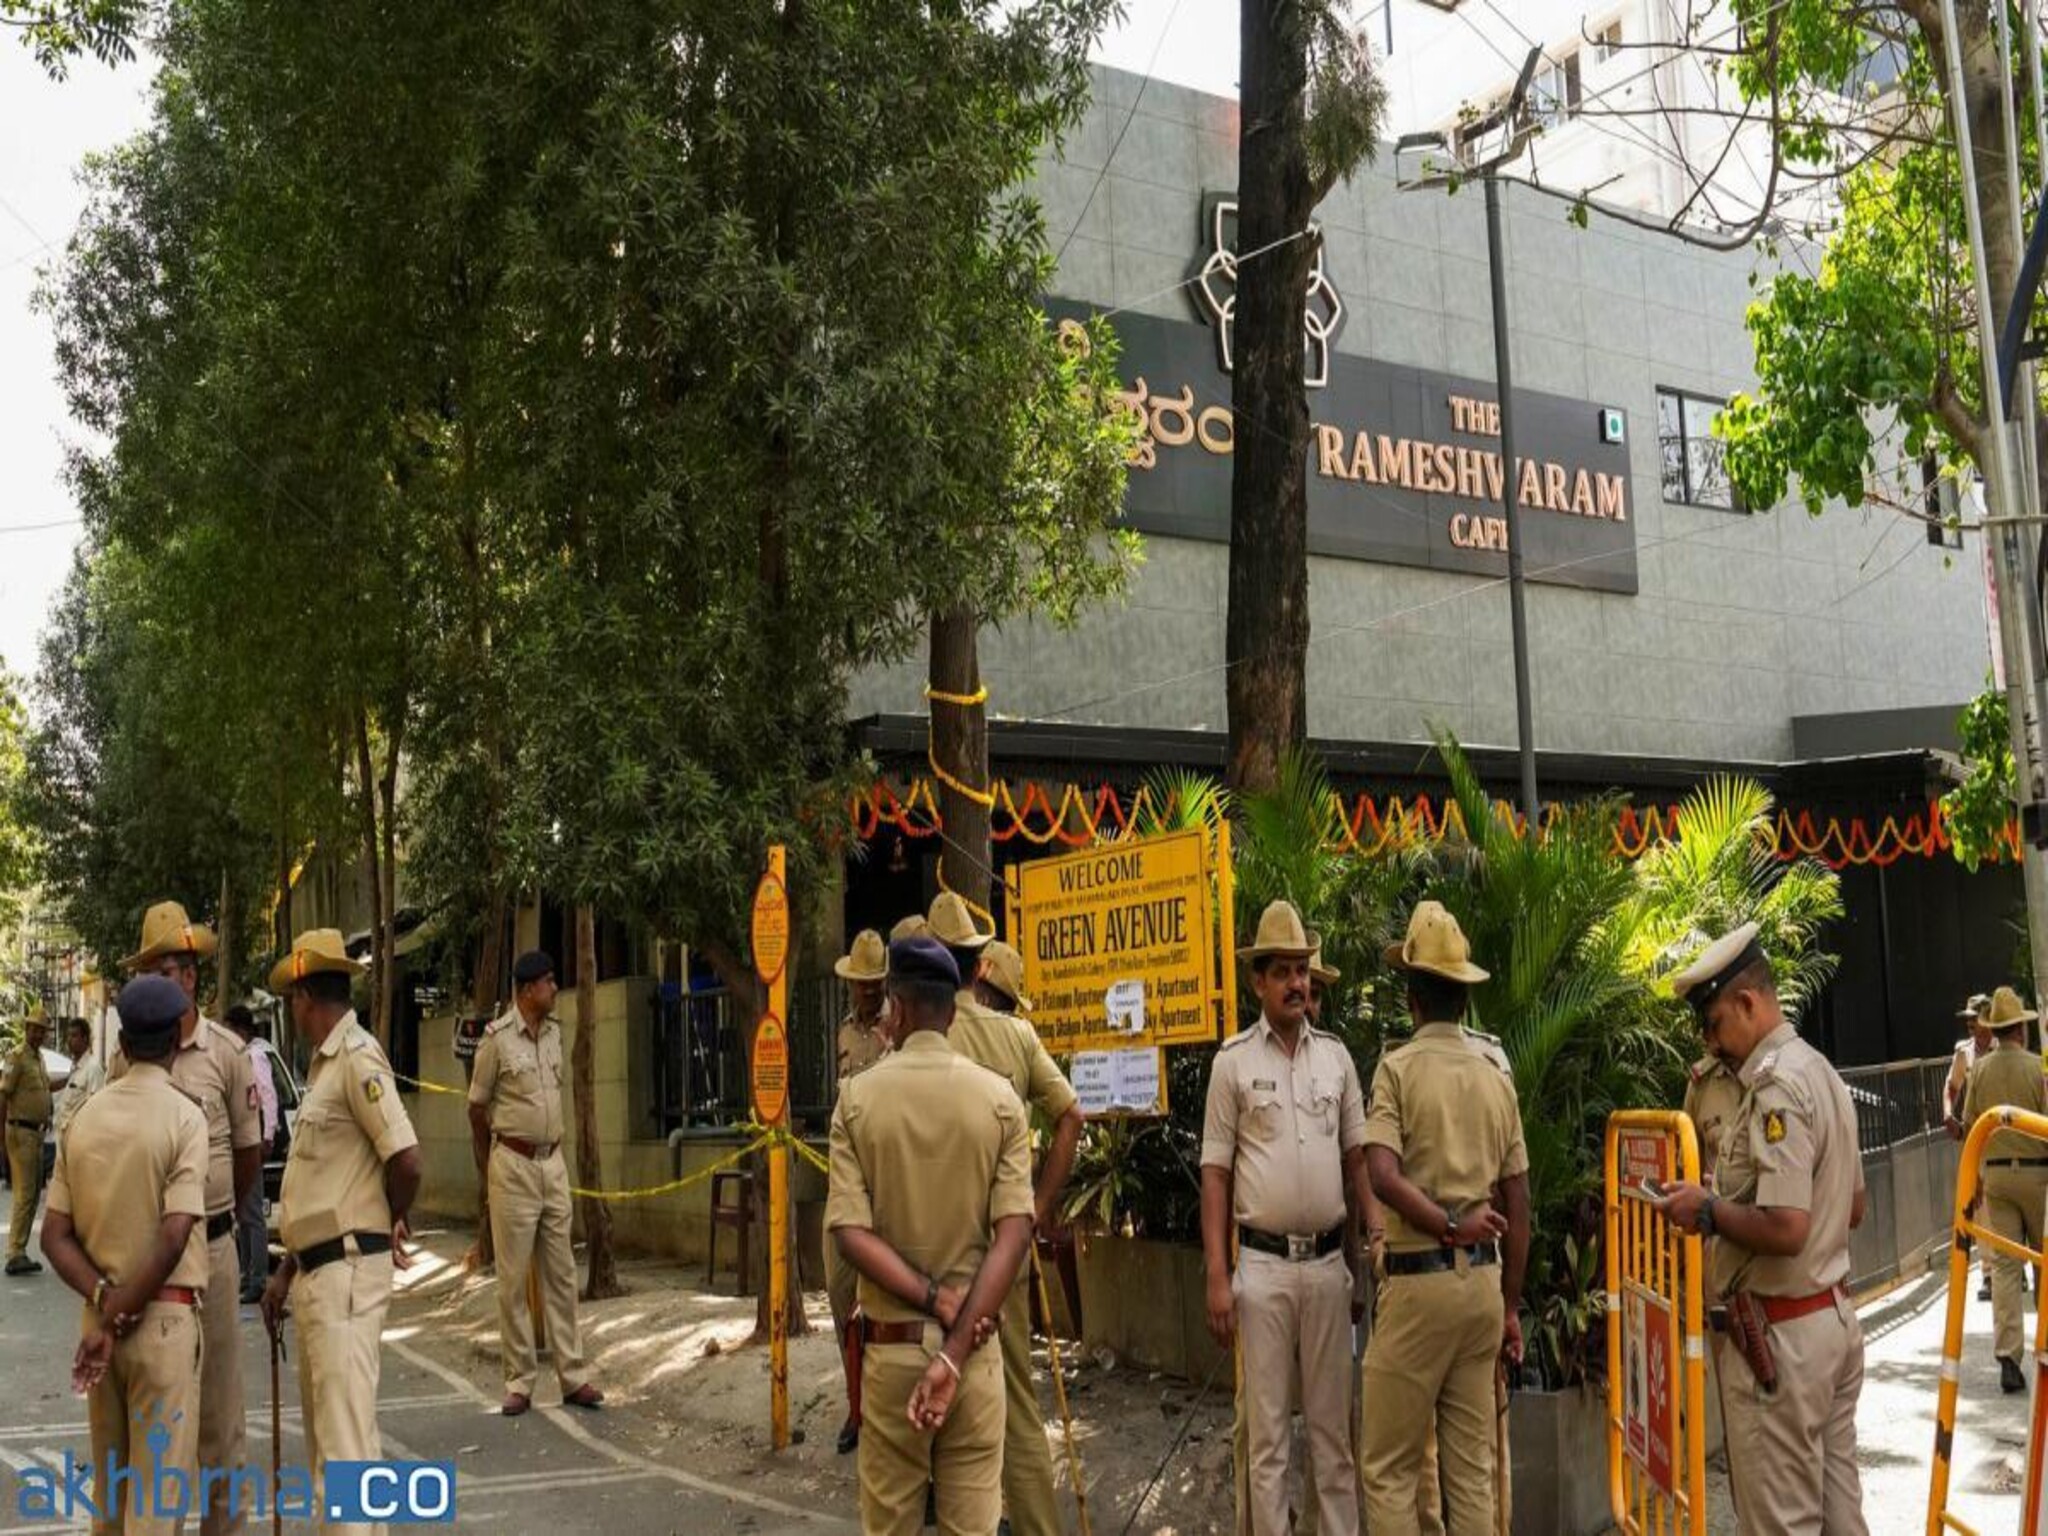 Indian police arrested two suspects in the Bengaluru cafe bombing incident